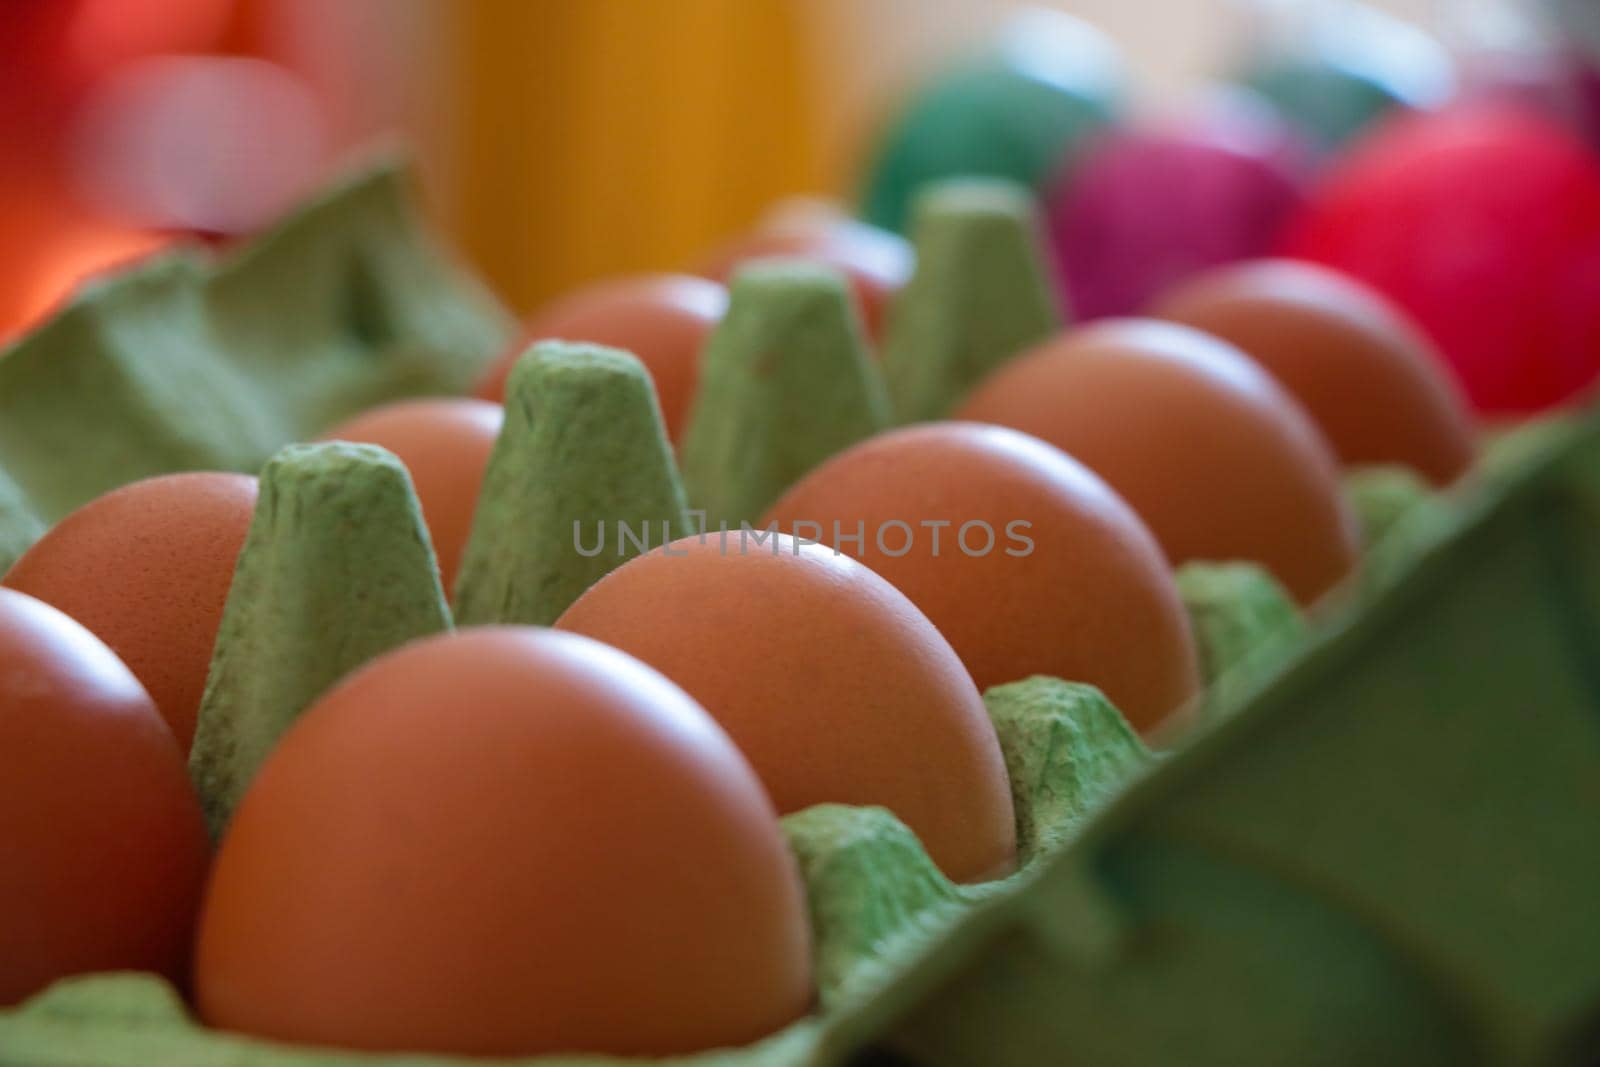 Cardboard package with homemade yellow delicious eggs. Out of focus, blurred